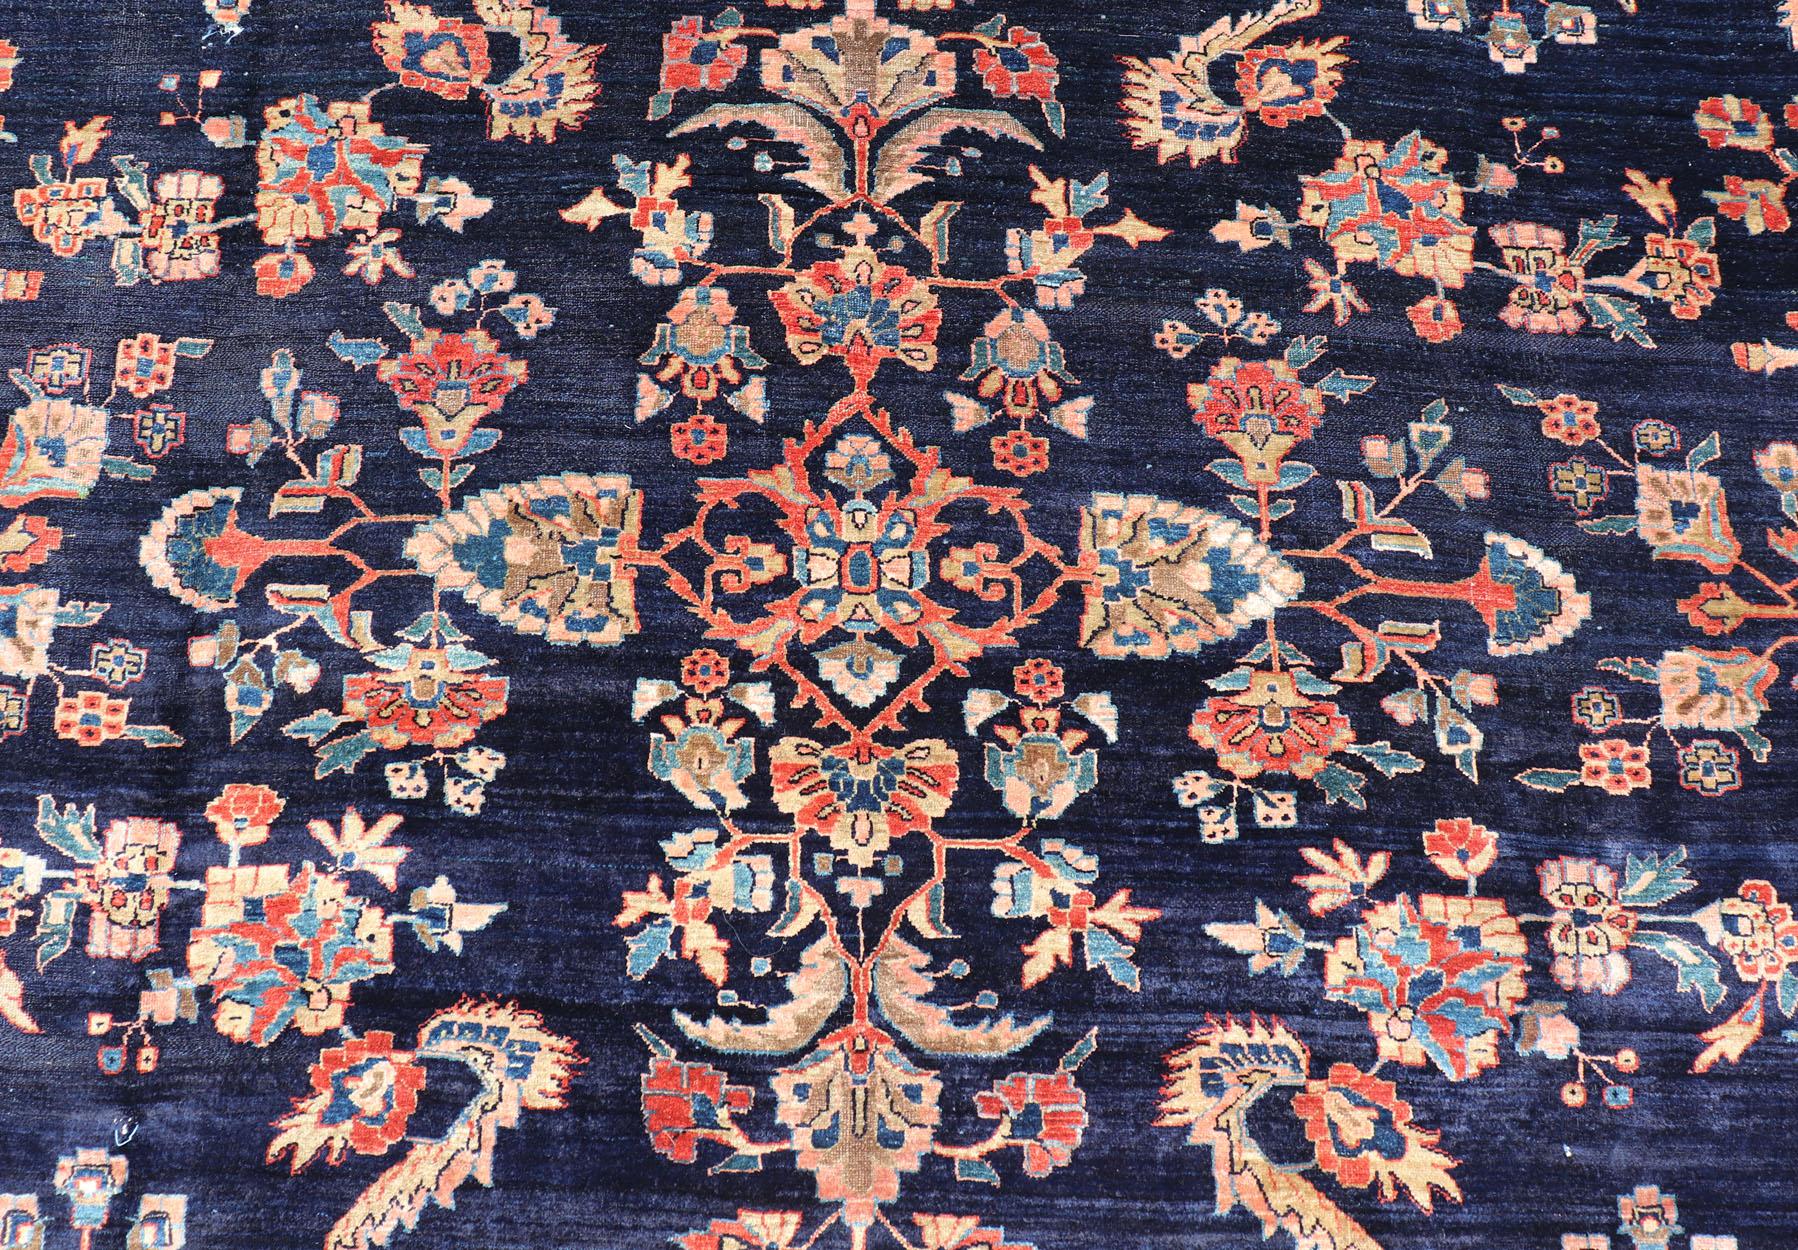 Antique Large Sarouk Faraghan Rug with Floral Pattern in Navy and Orange-Red For Sale 4